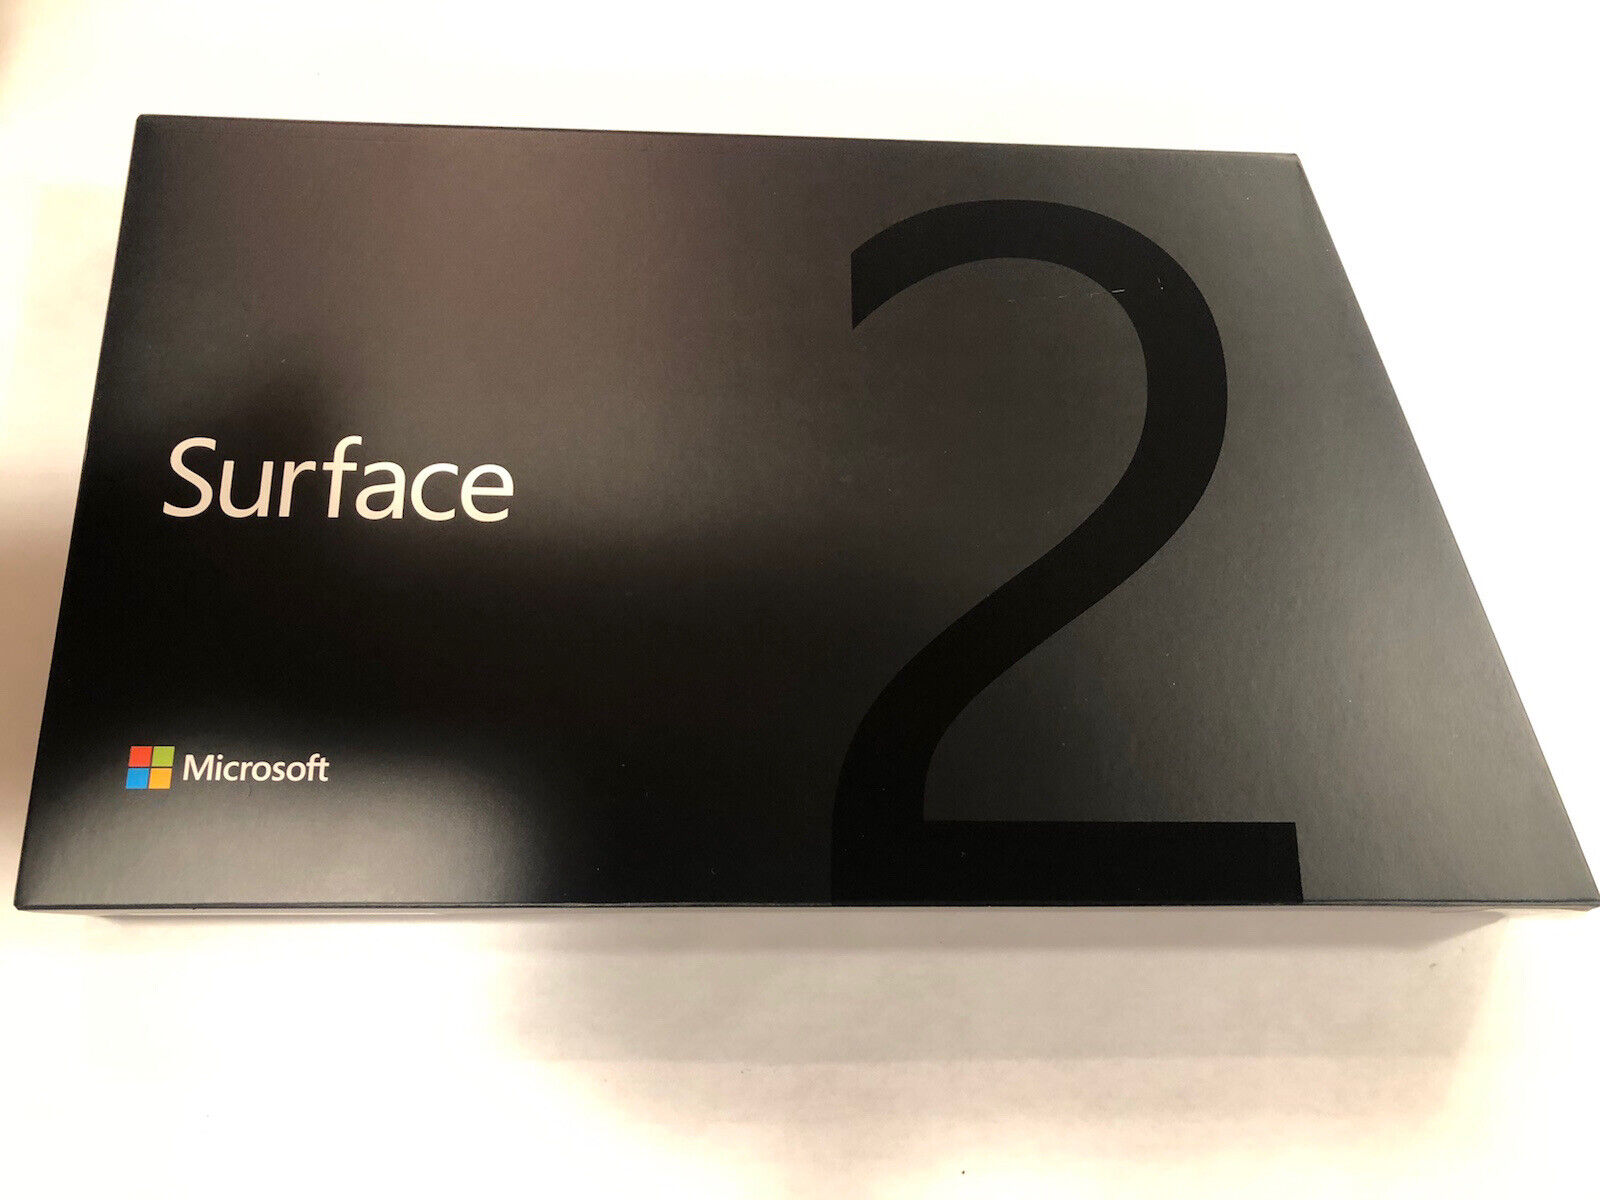 New Sealed Microsoft Surface 2 64GB, Wi-Fi, 10.6in - Magnesium With Keyboard.